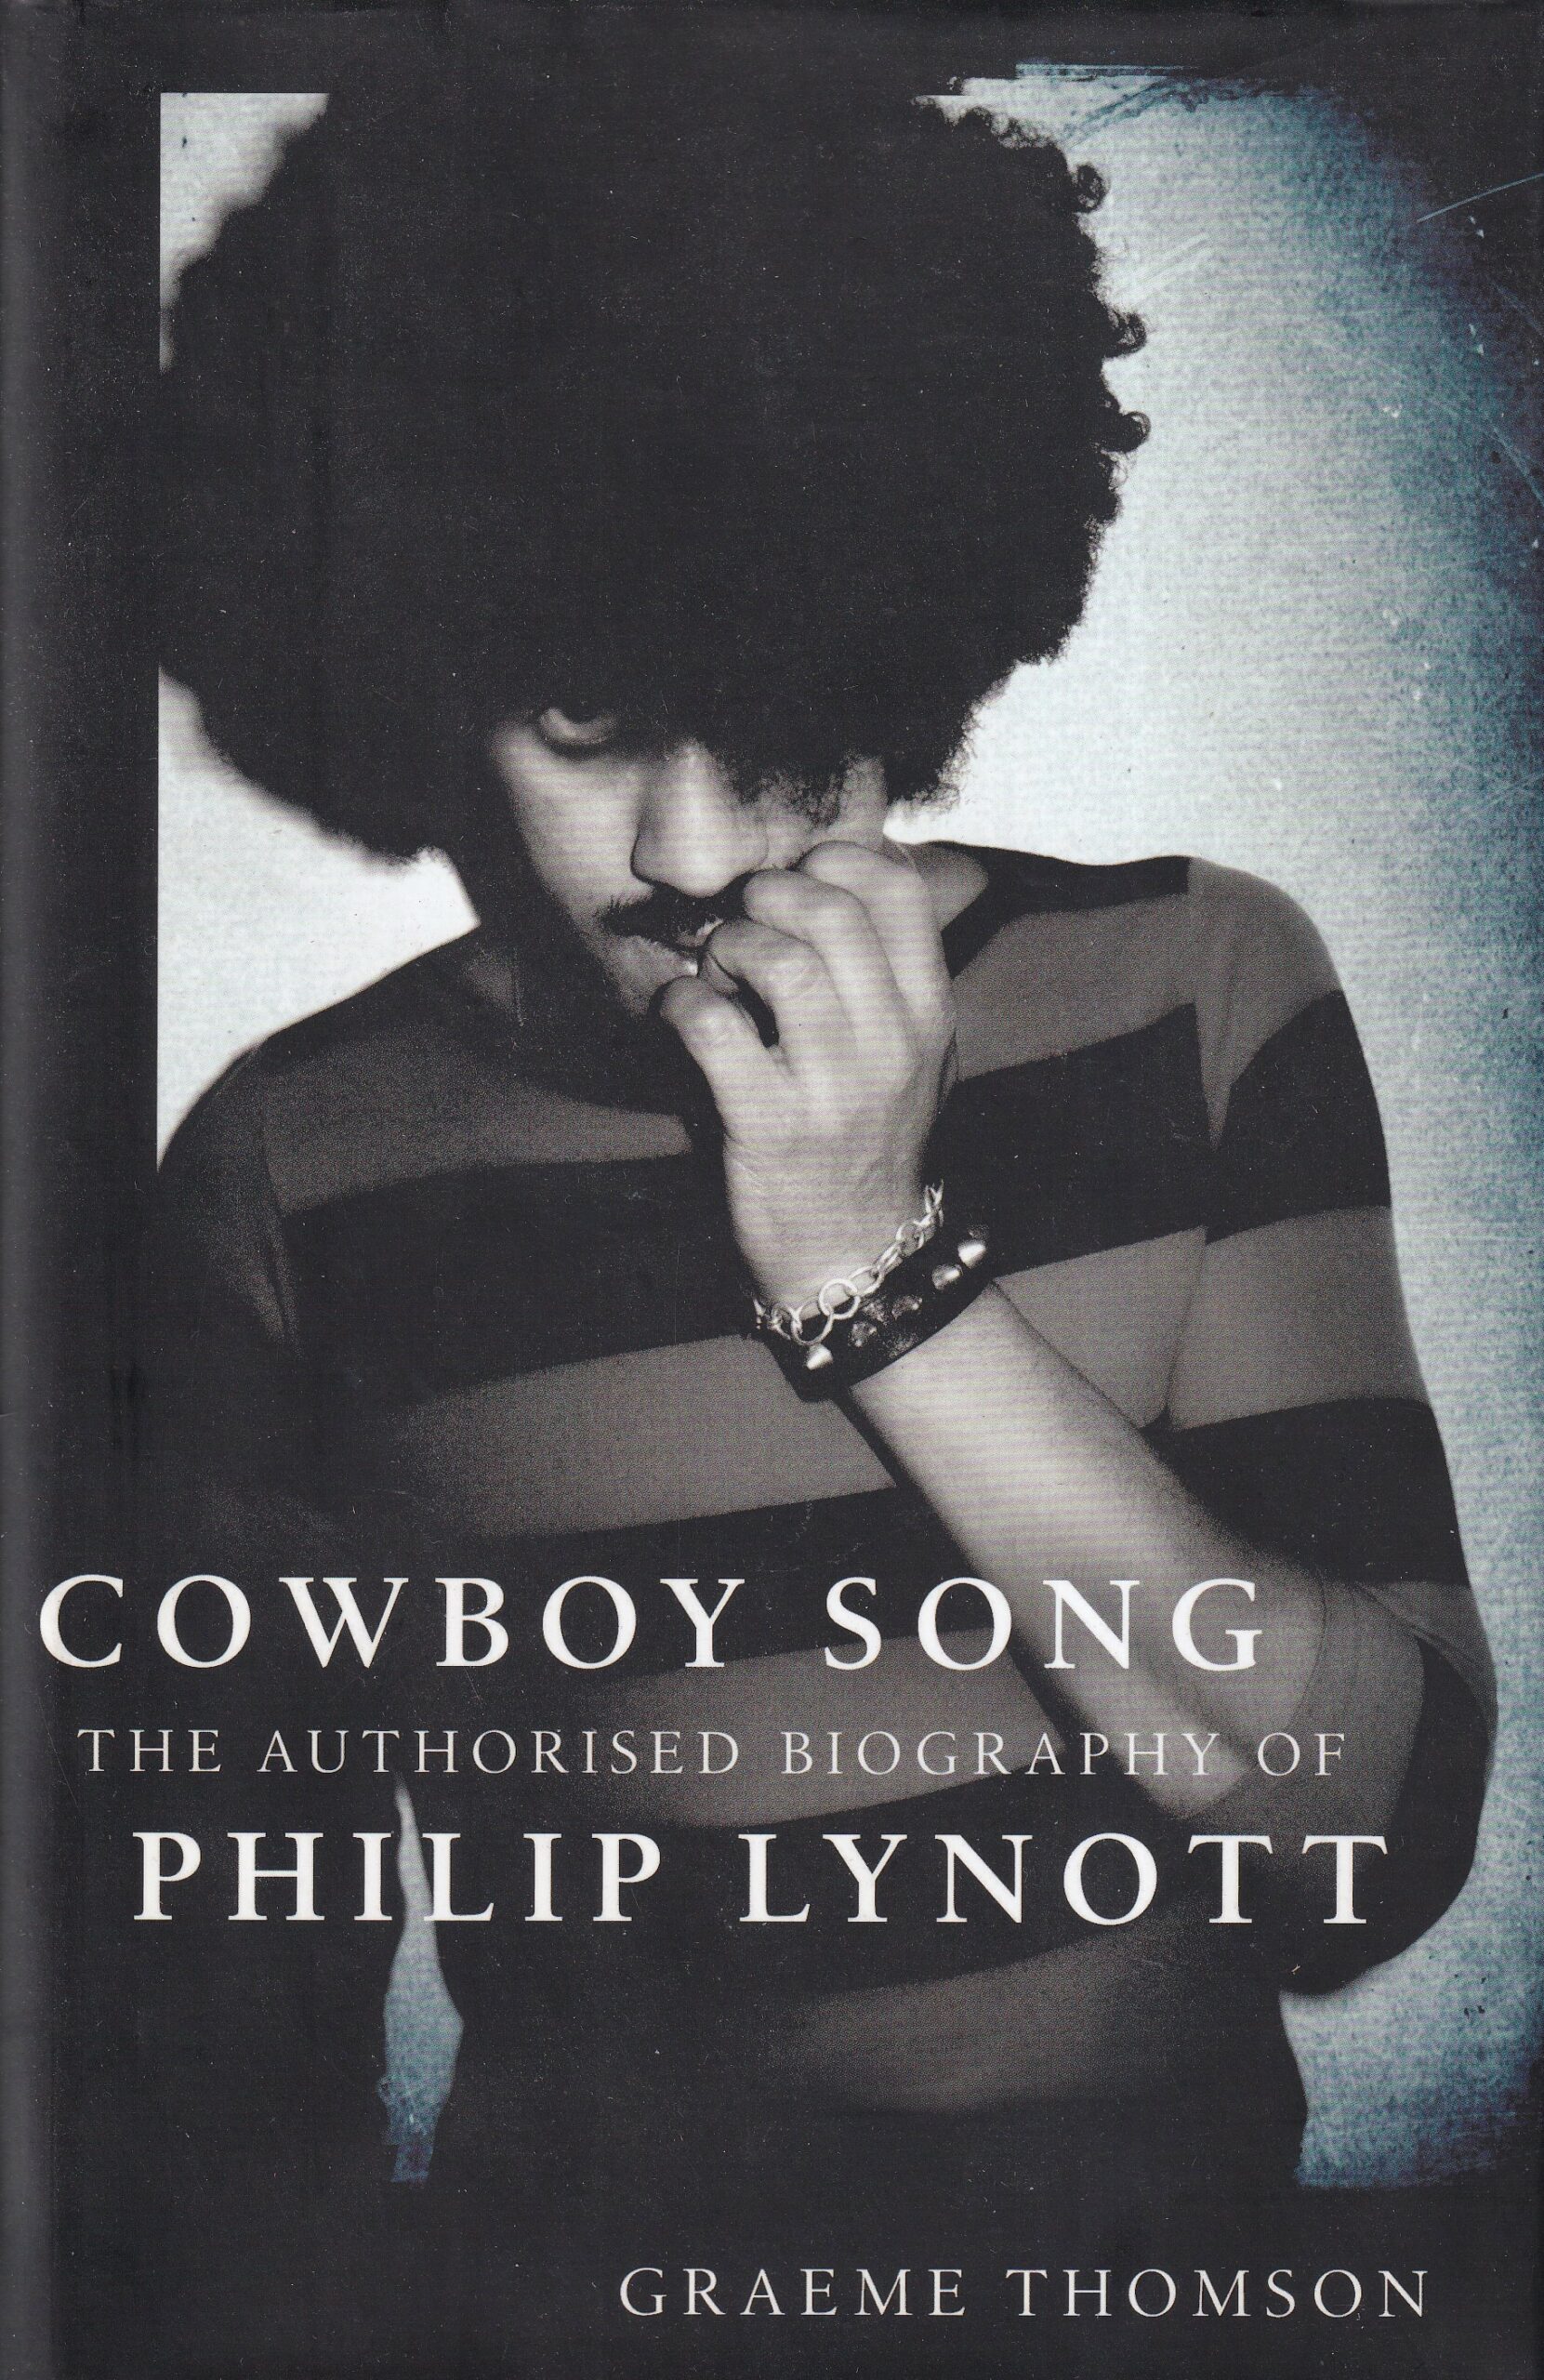 Cowboy Song: The Authorised Biography of Philip Lynott by Graeme Thomson